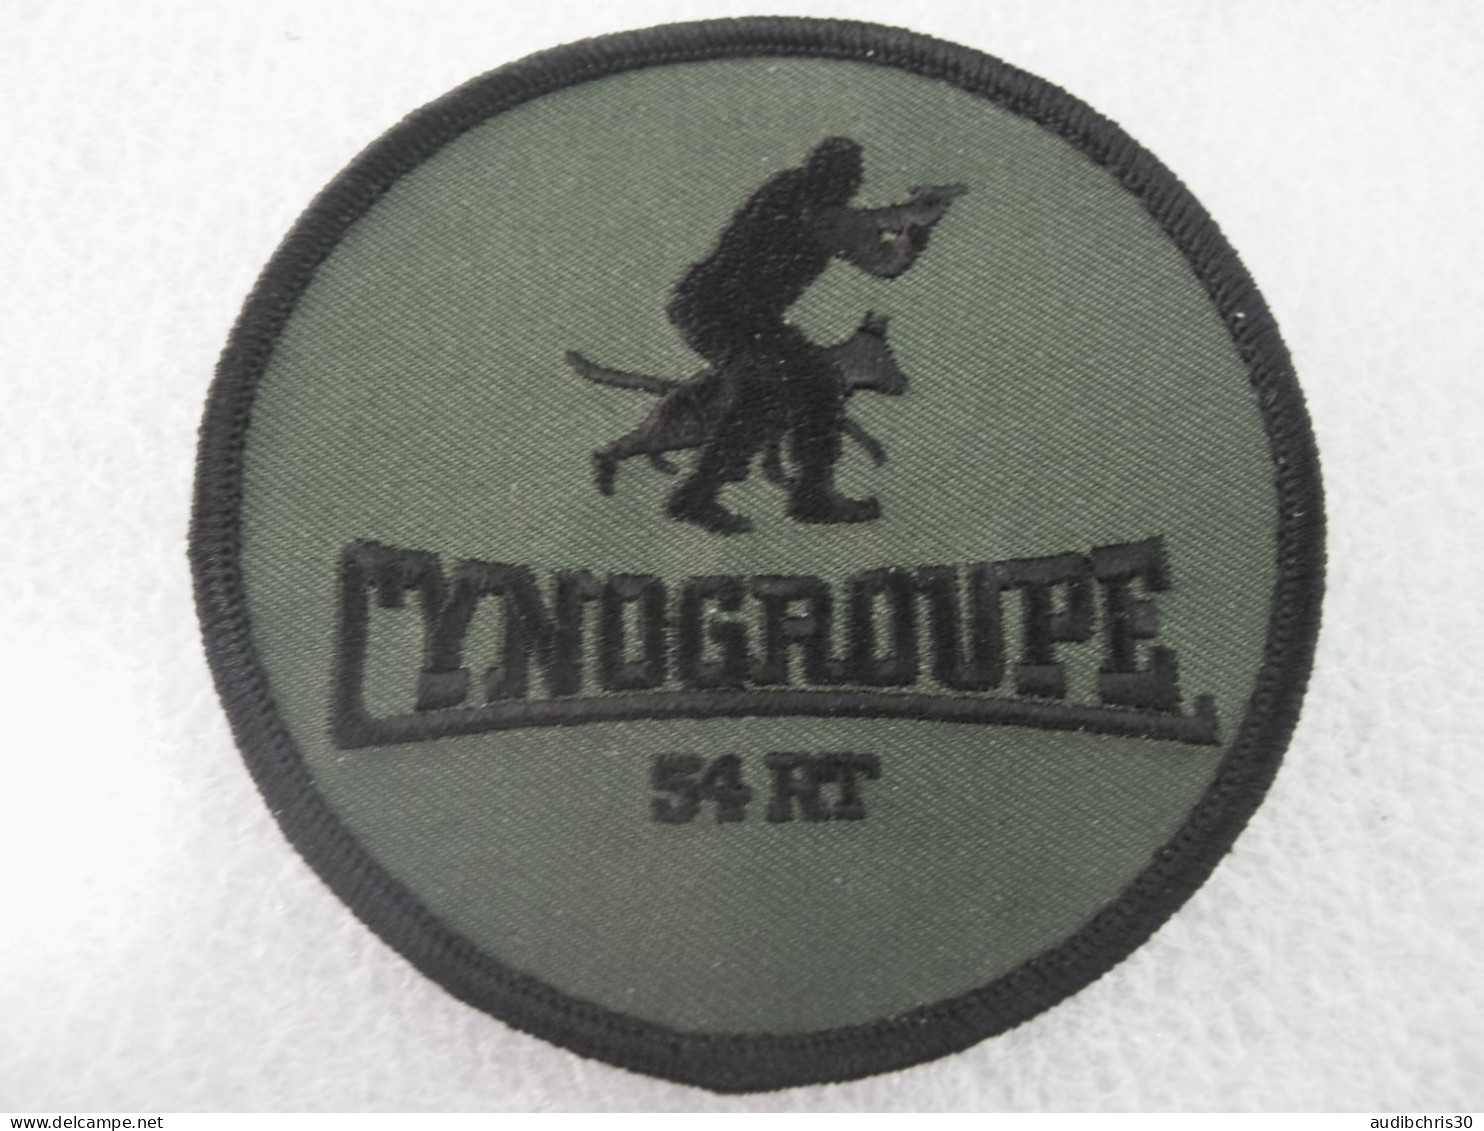 ECUSSON TRANSMISSIONS 54° RT LE GROUPE CYNOPHILE CYNOGROUPE OPEX SCRATCH 90MM - Landmacht